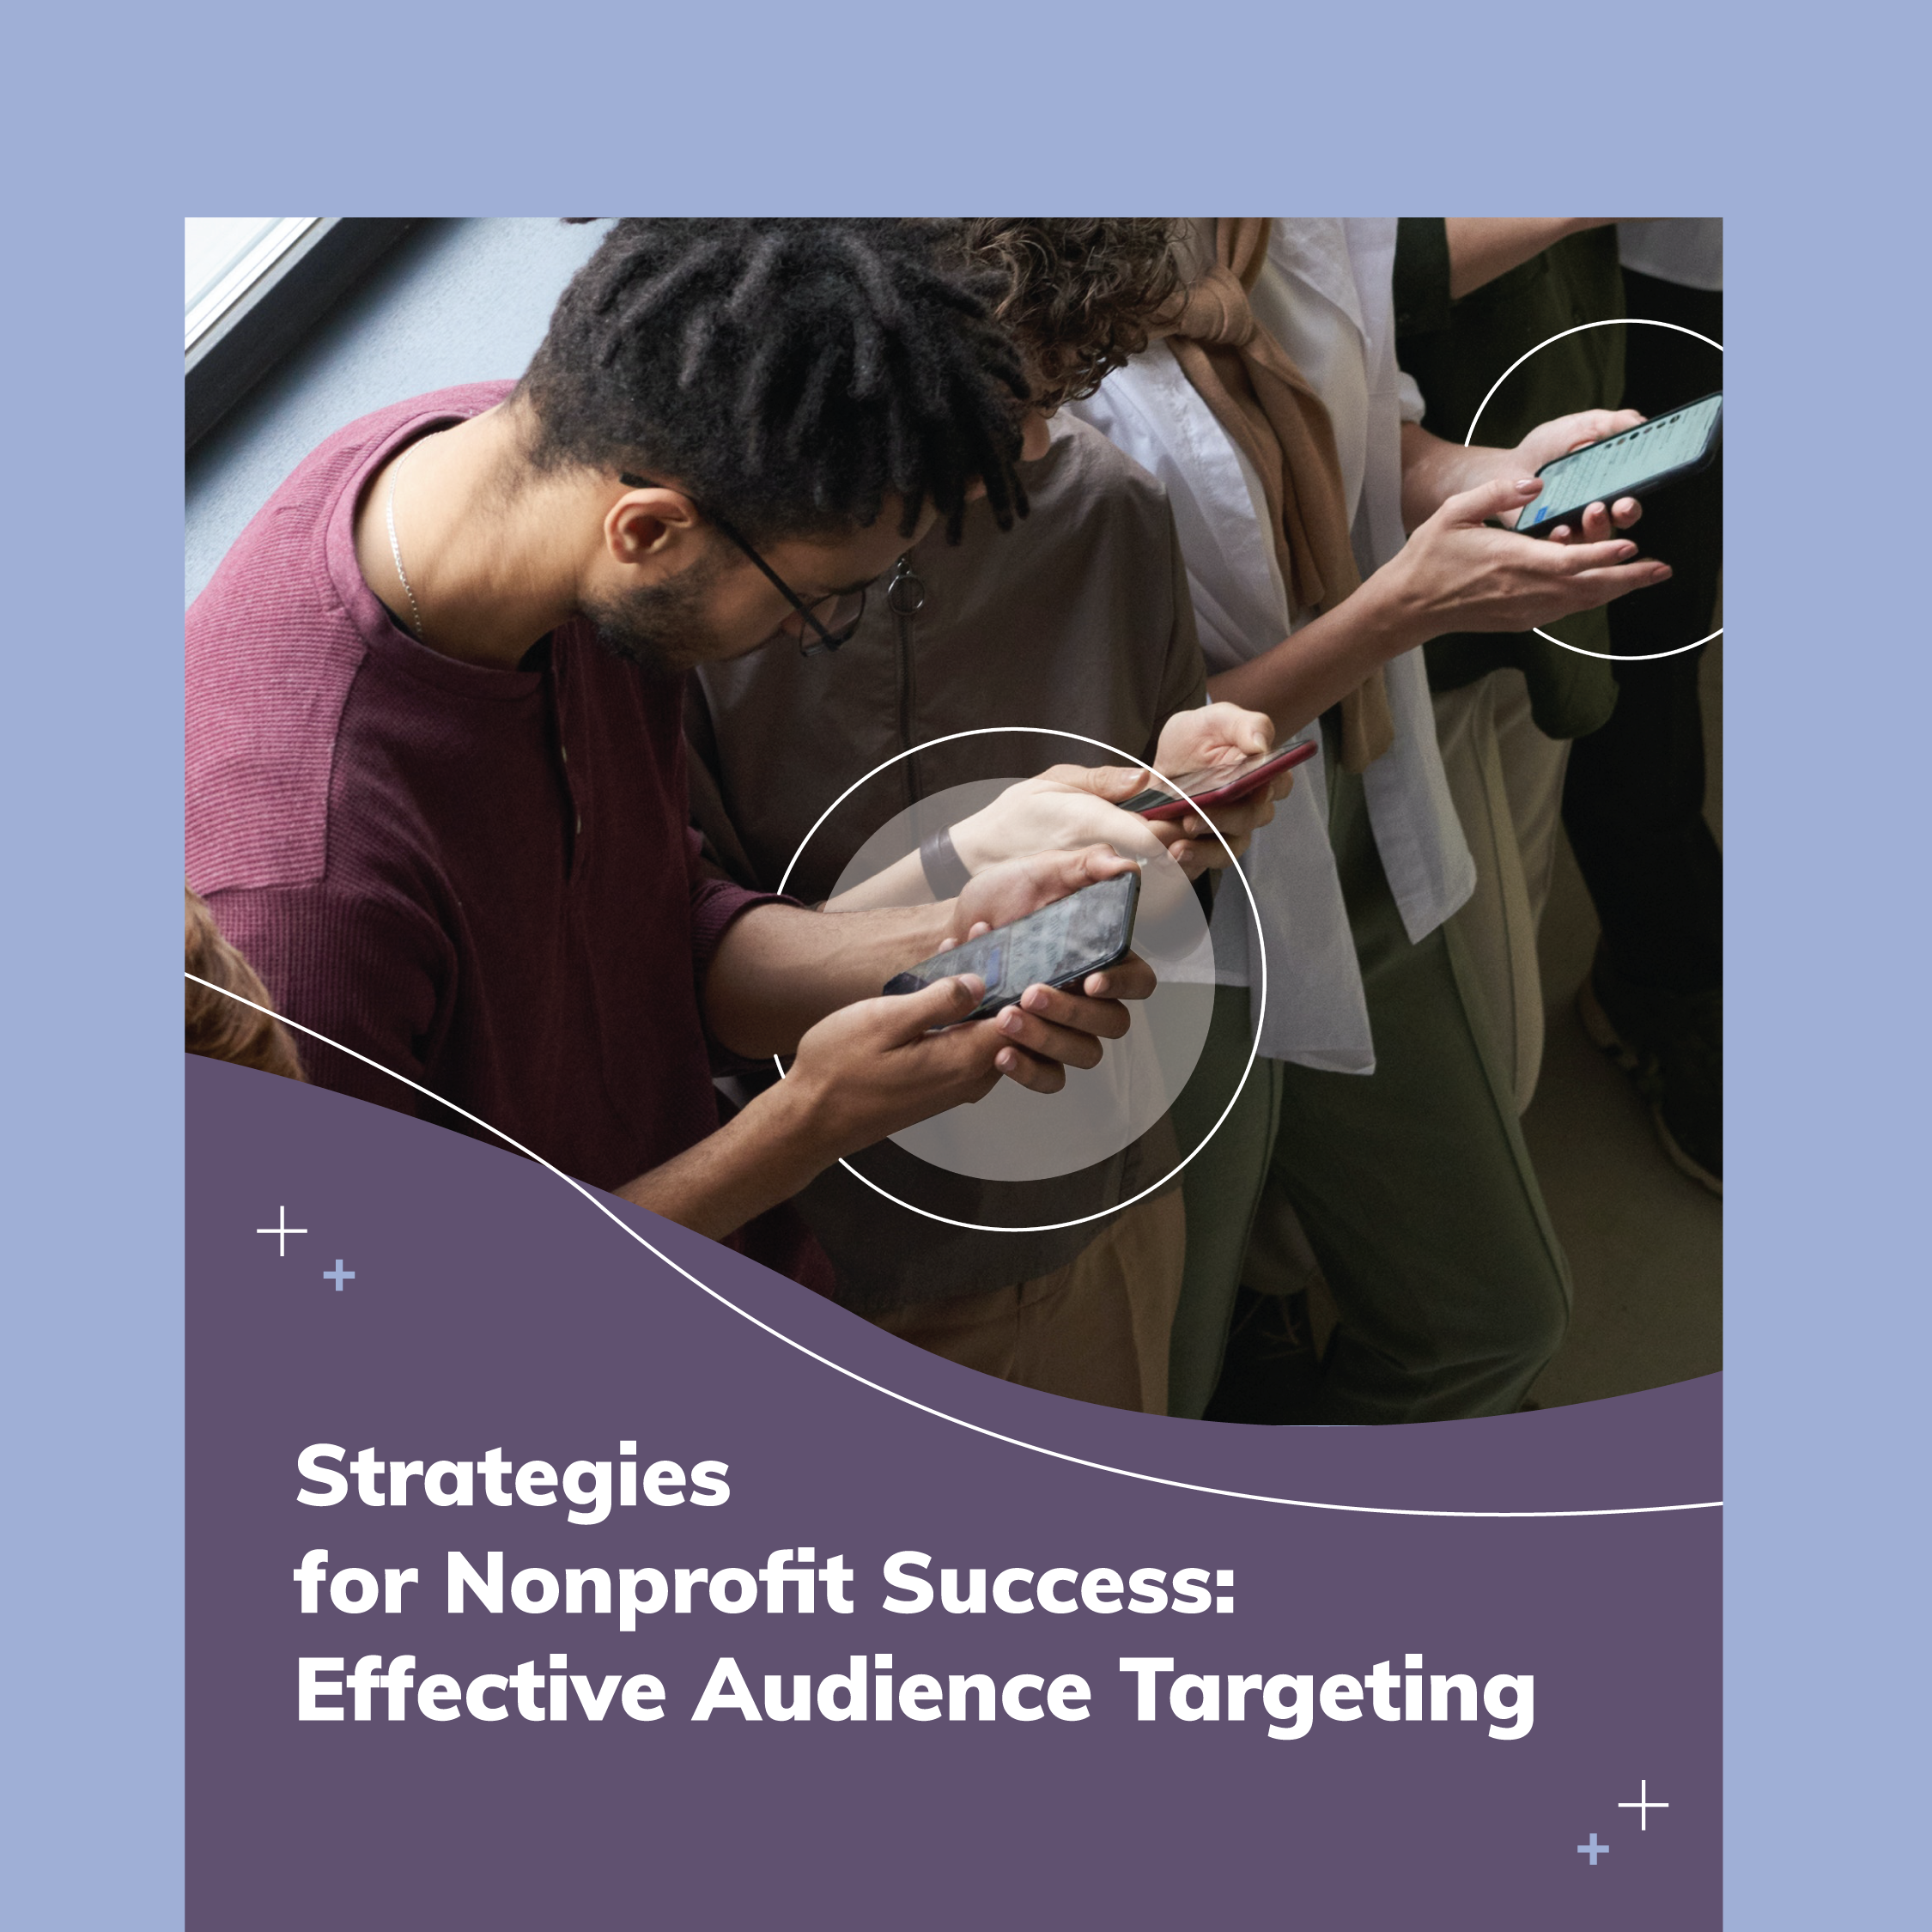 Strategies for Nonprofit Success: Effective Audience Targeting